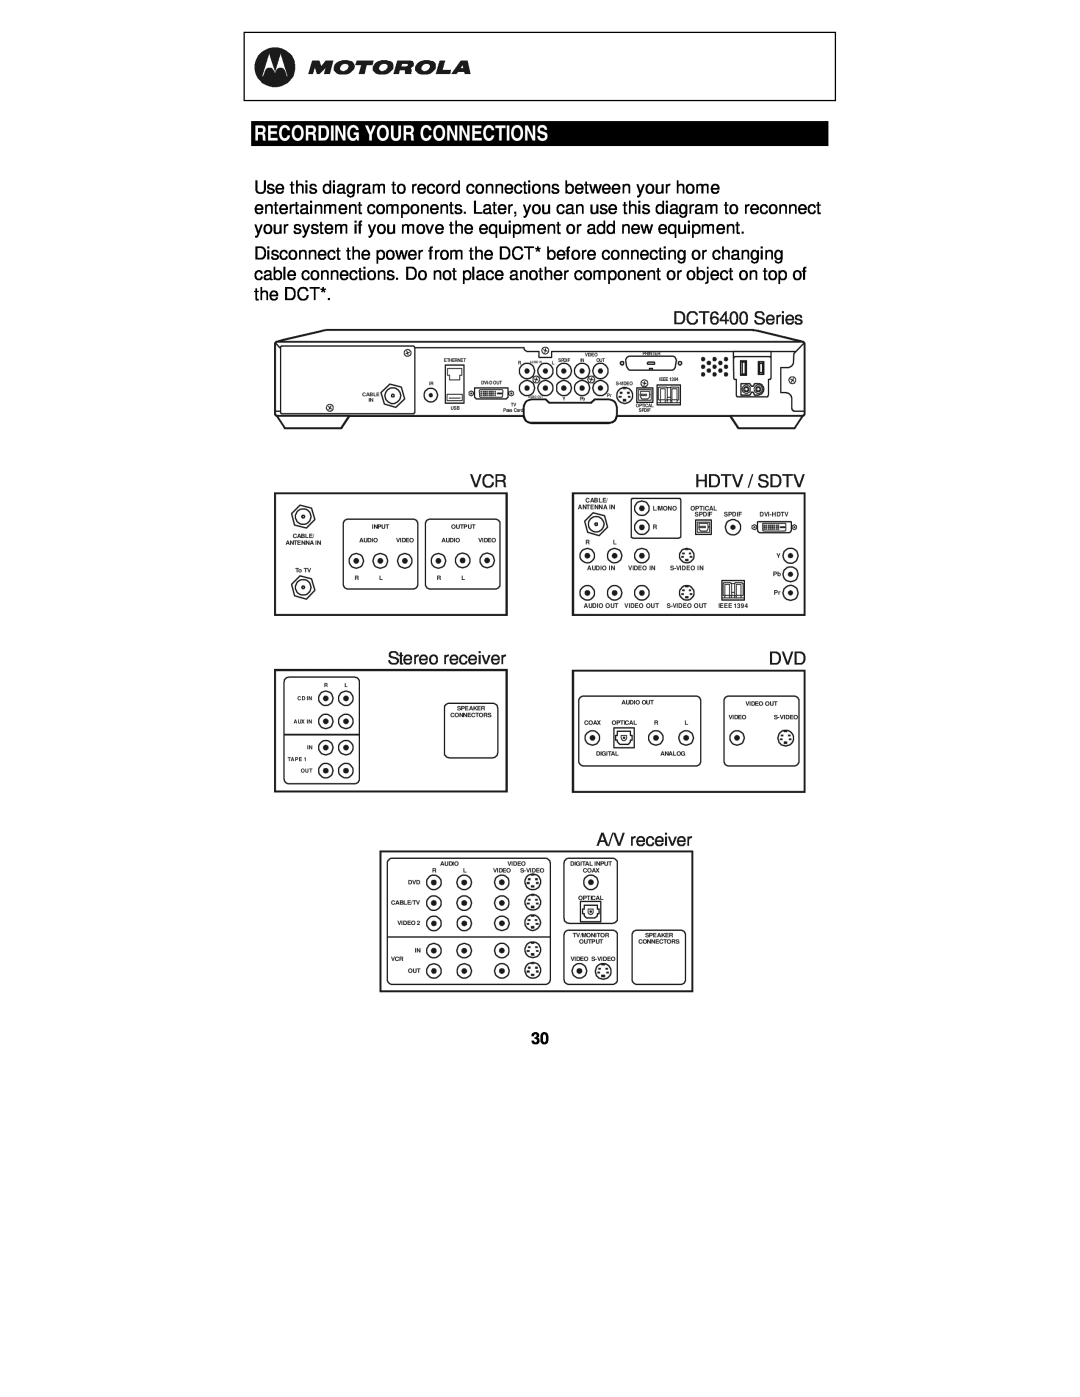 Motorola manual Recording Your Connections, Hdtv / Sdtv, Stereo receiver, A/V receiver, DCT6400 Series 